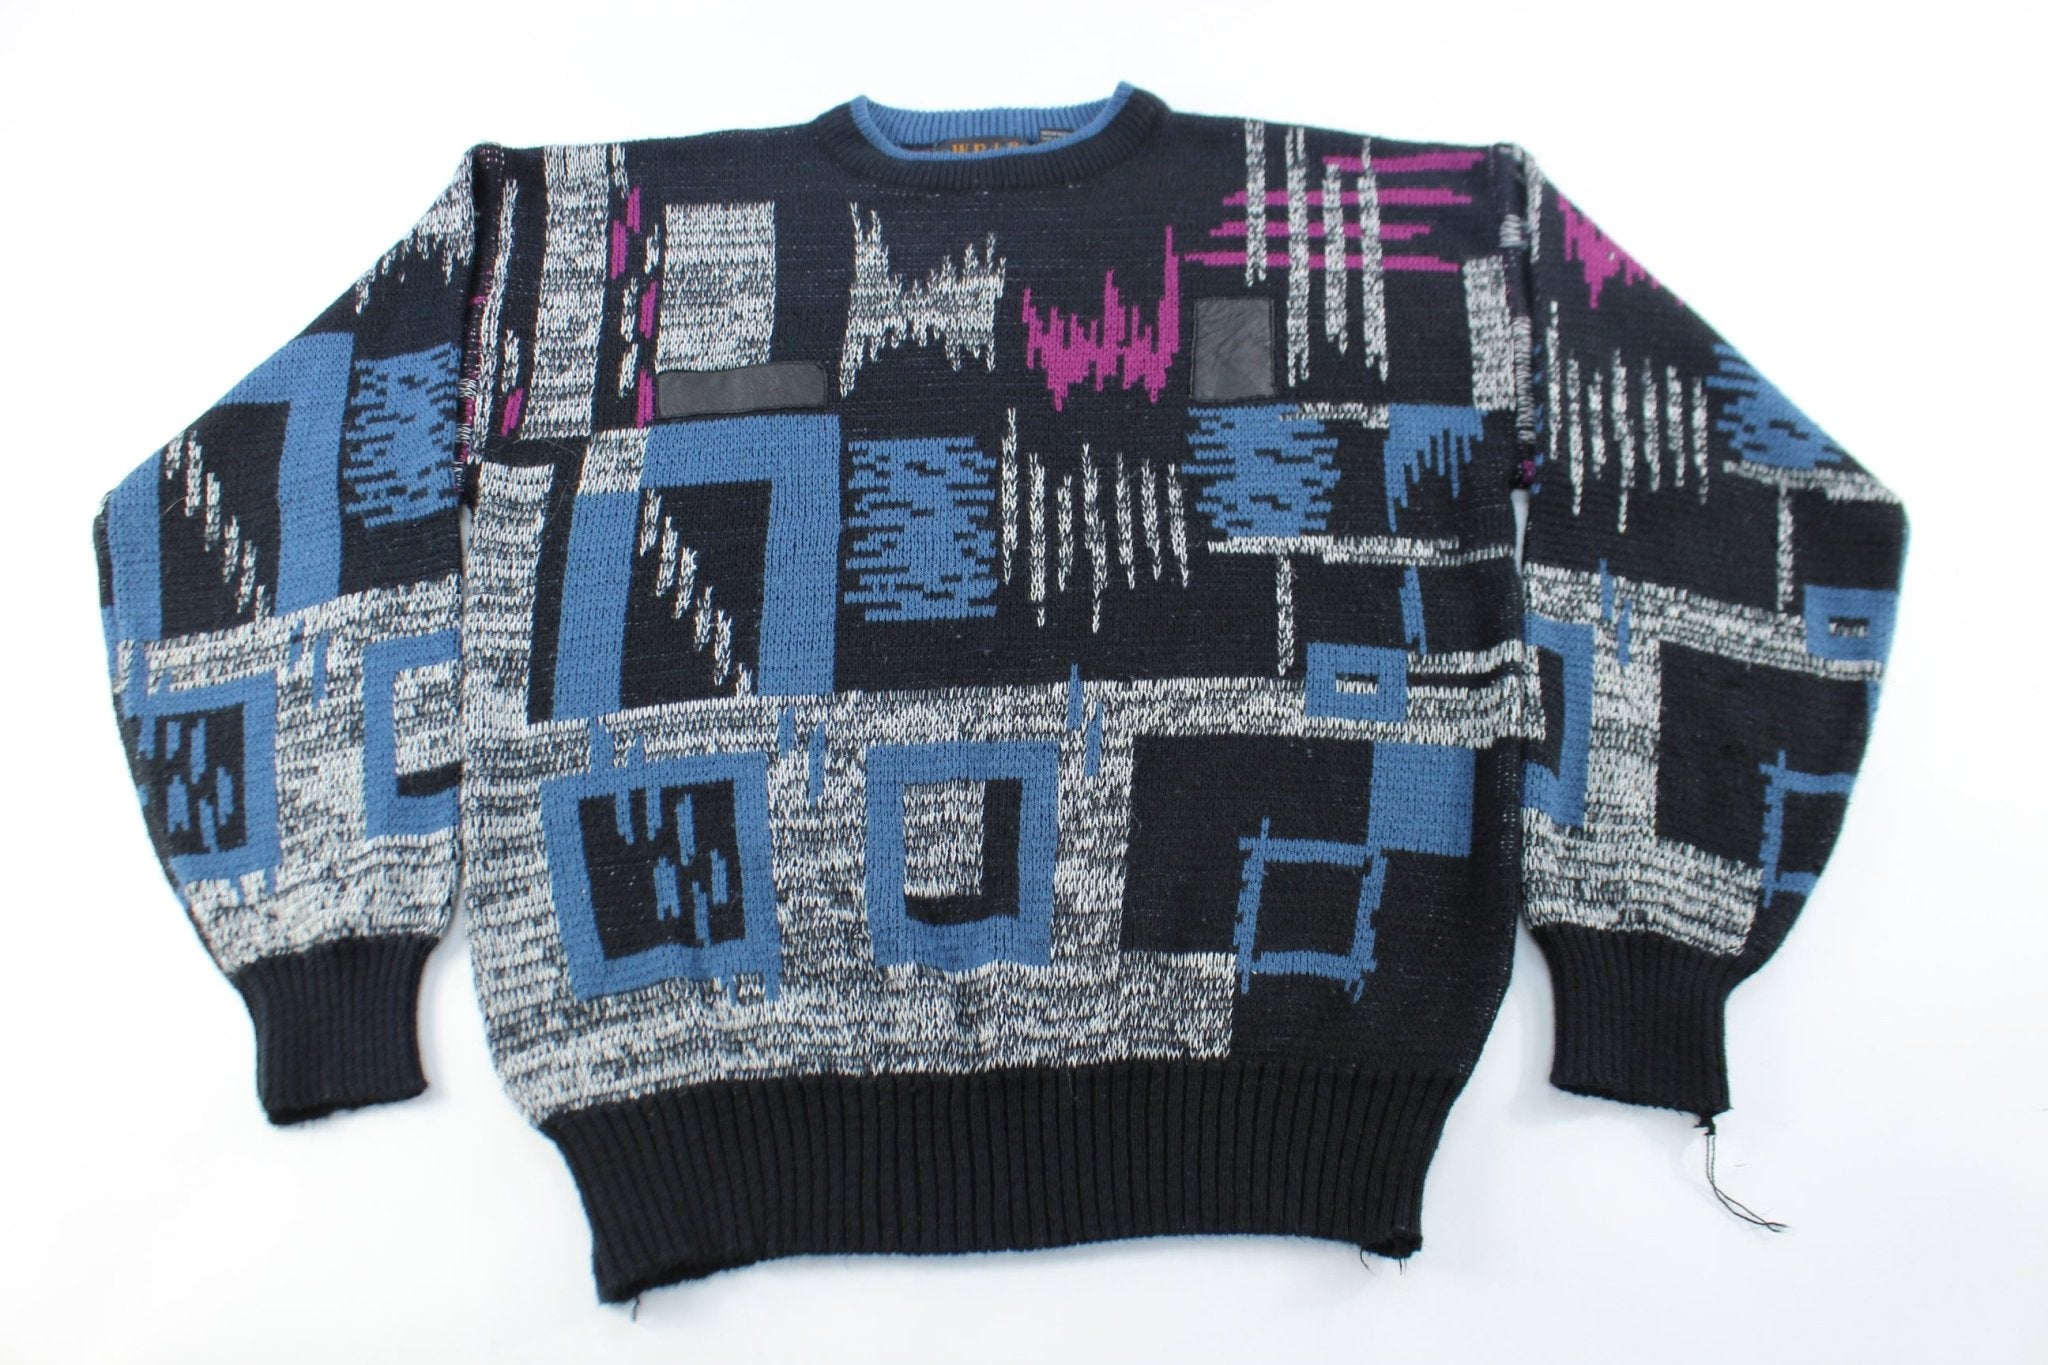 Wear The Right Thing Patterned Sweater